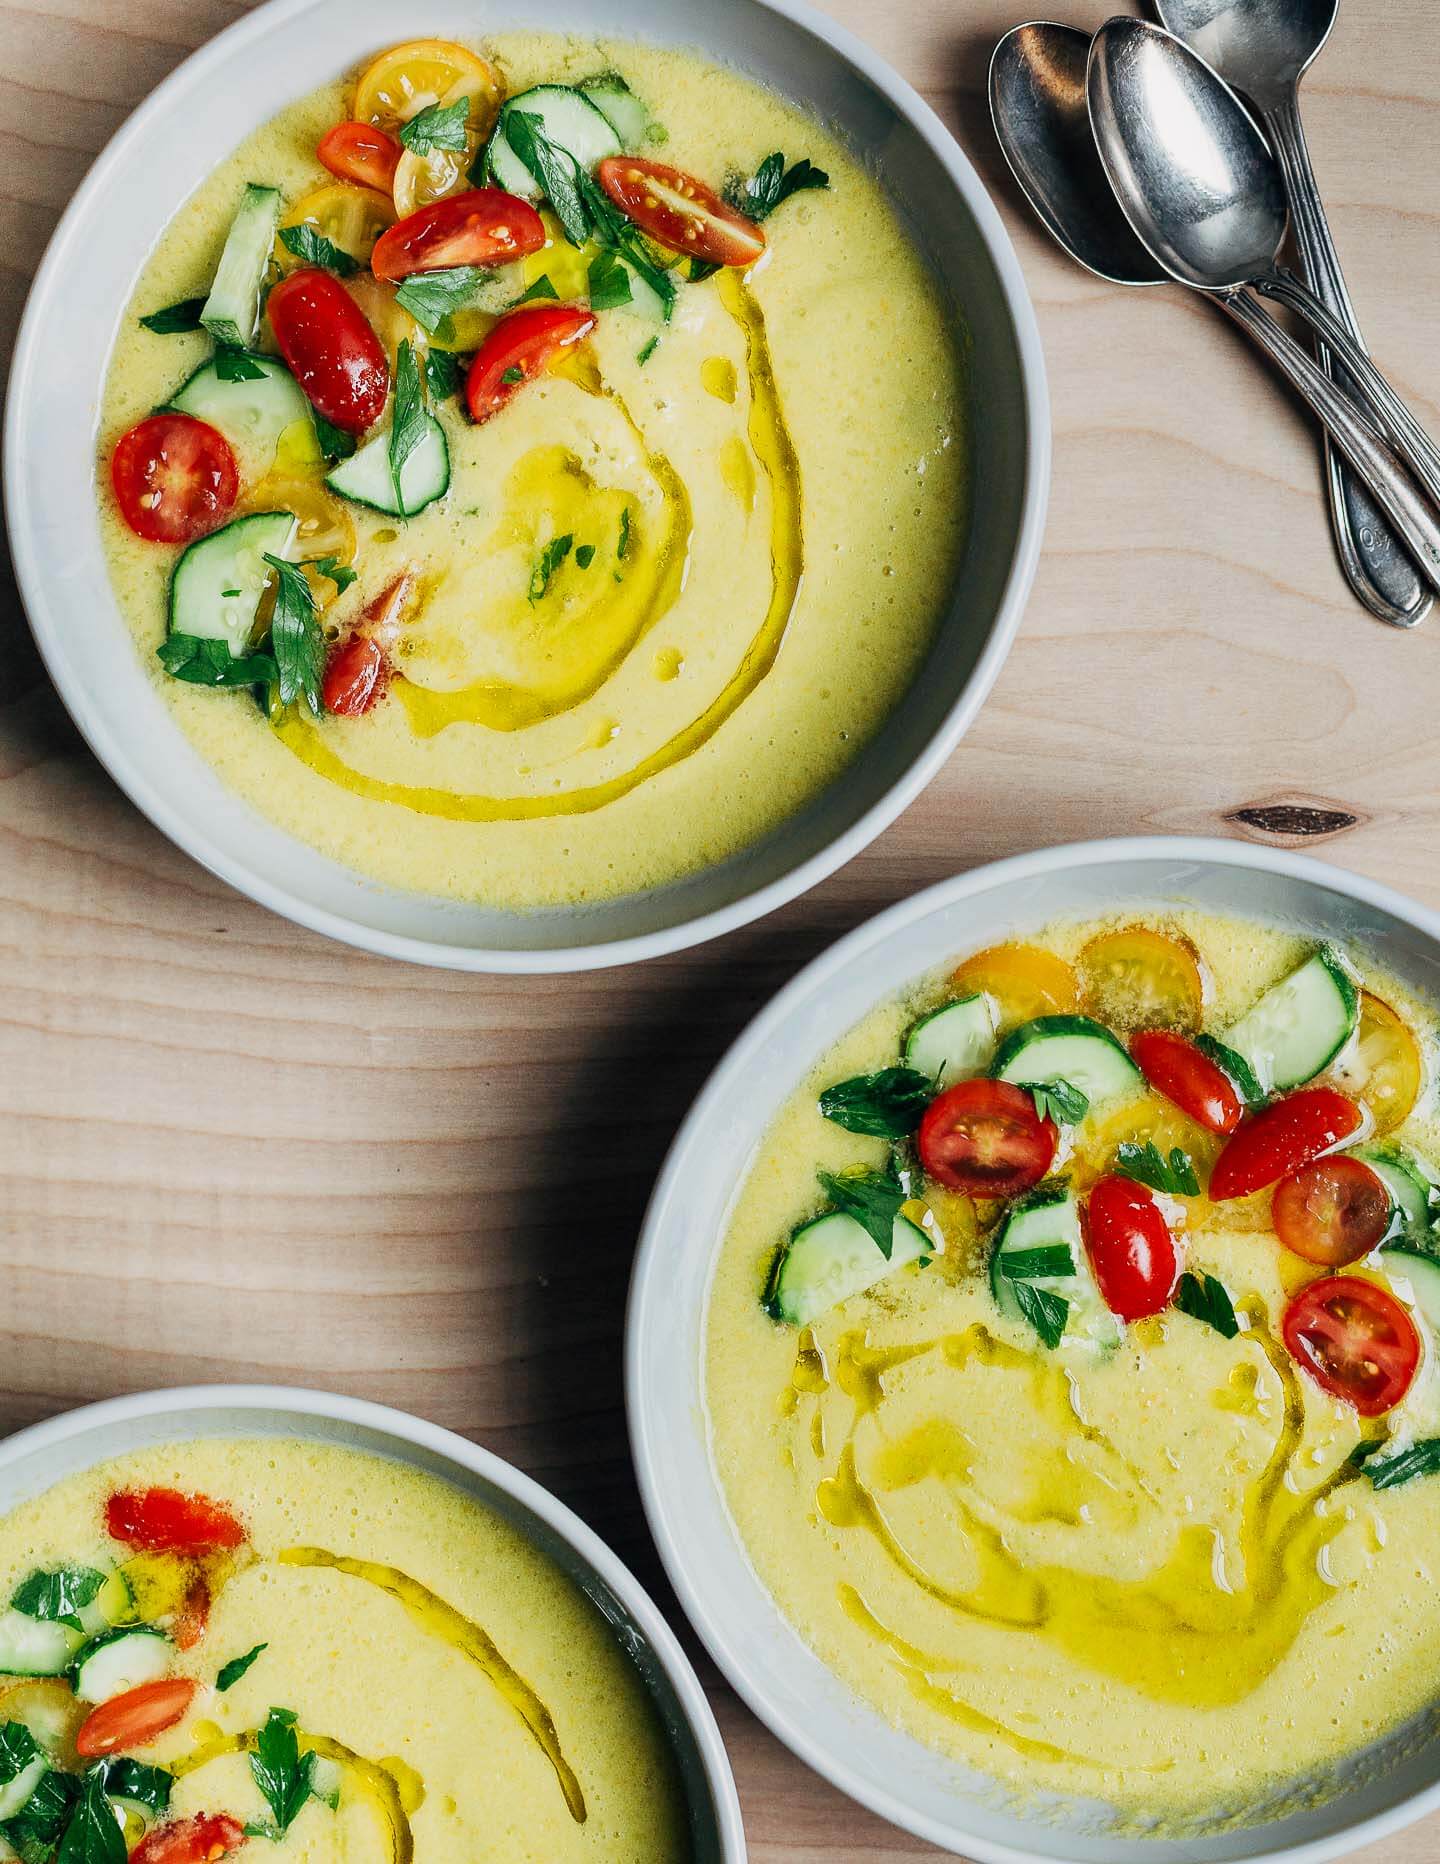 Three bowls of yellow gazpacho garnished with cherry tomatoes, cucumbers, and herbs.